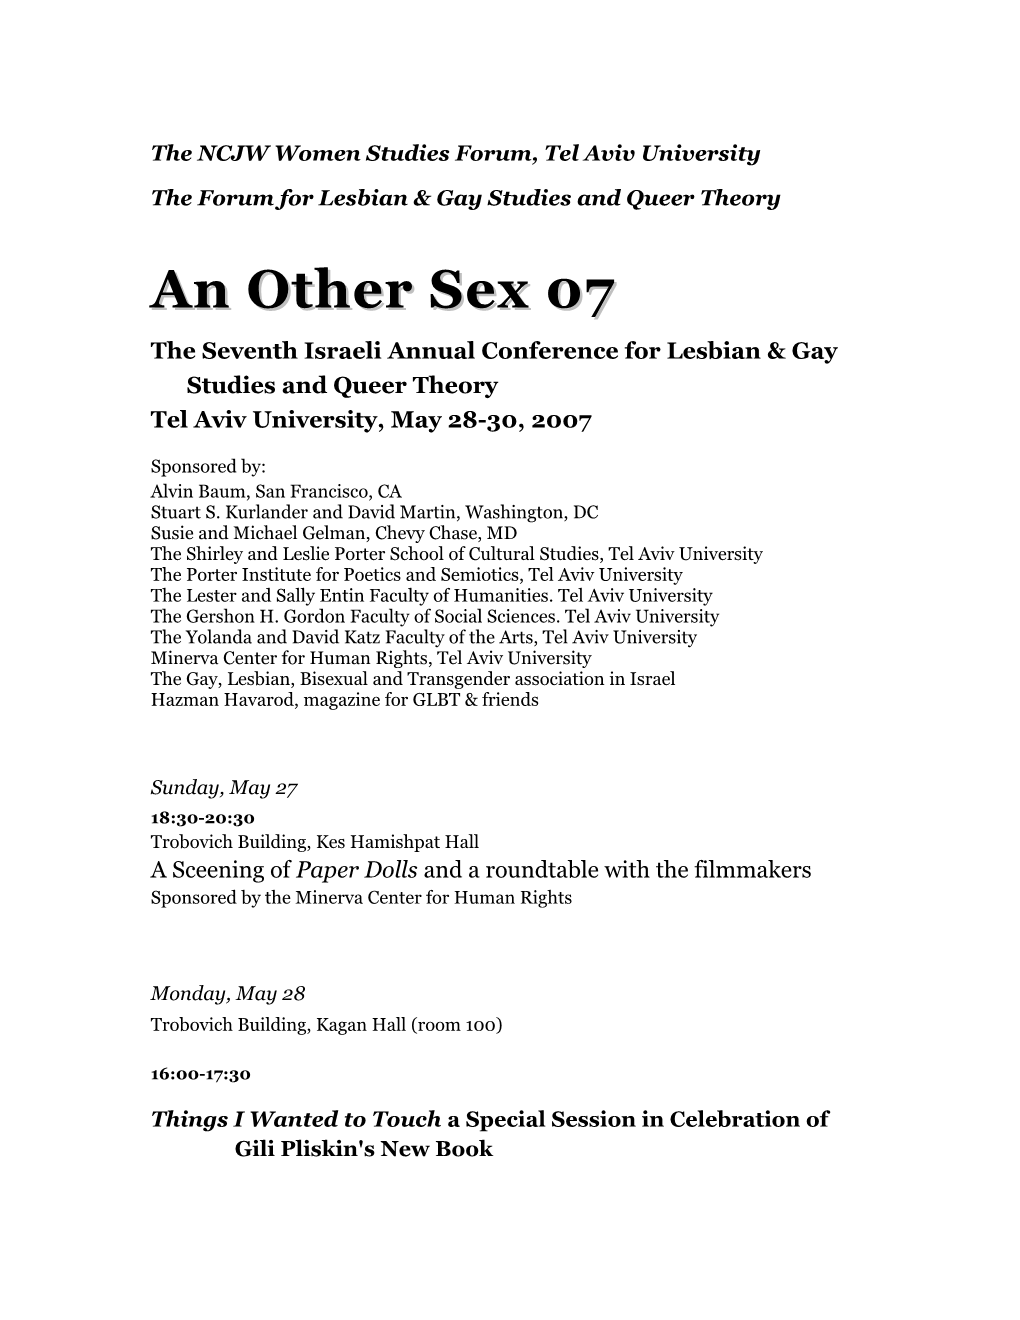 Report on the Second Lesbian and Gay Studies and Queer Theory Conference at TAU